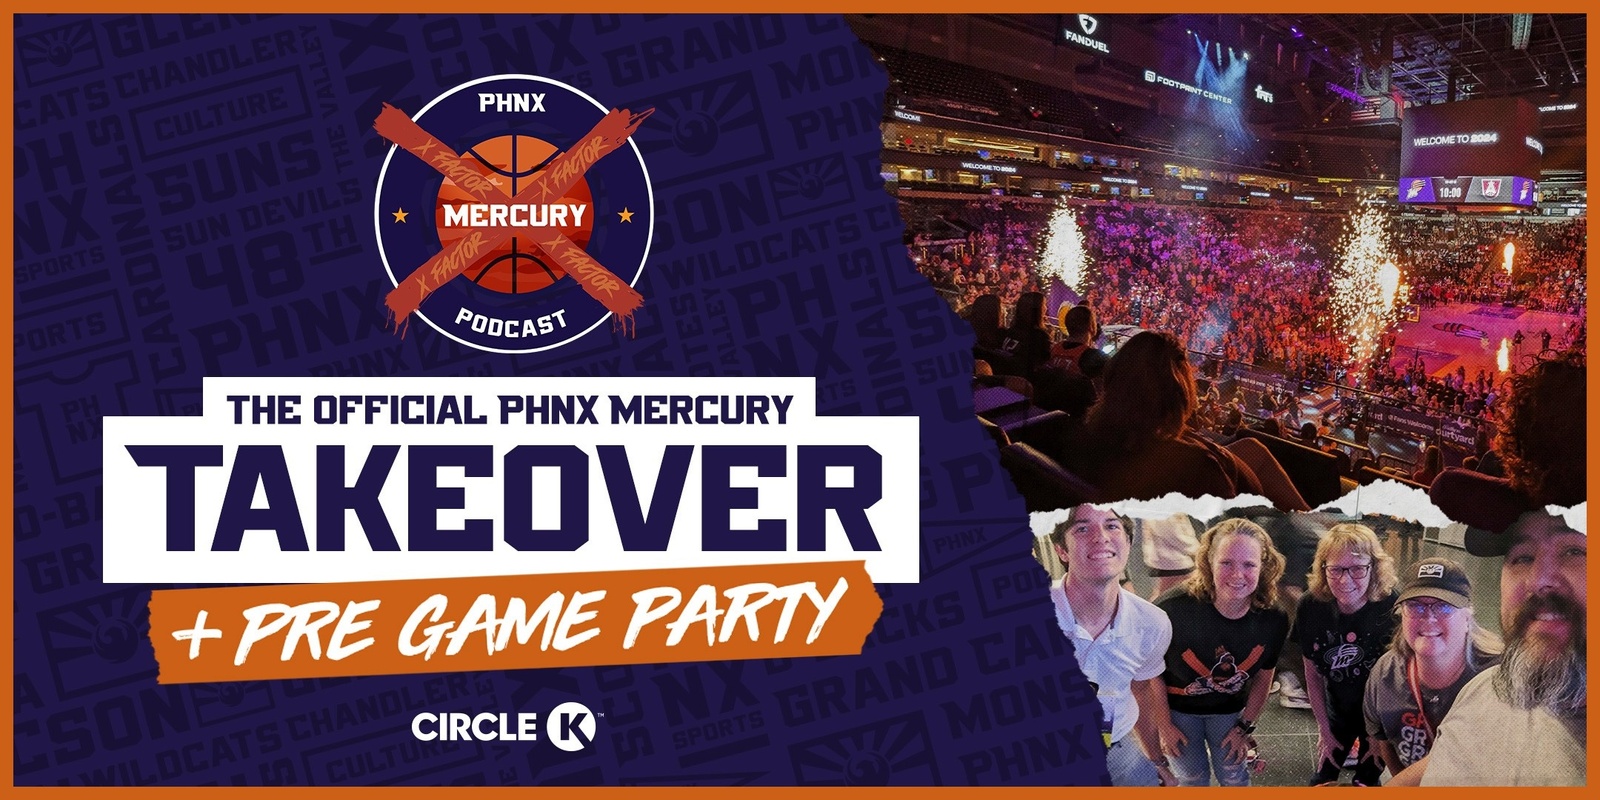 Banner image for PHNX Mercury Takeover at Footprint Center